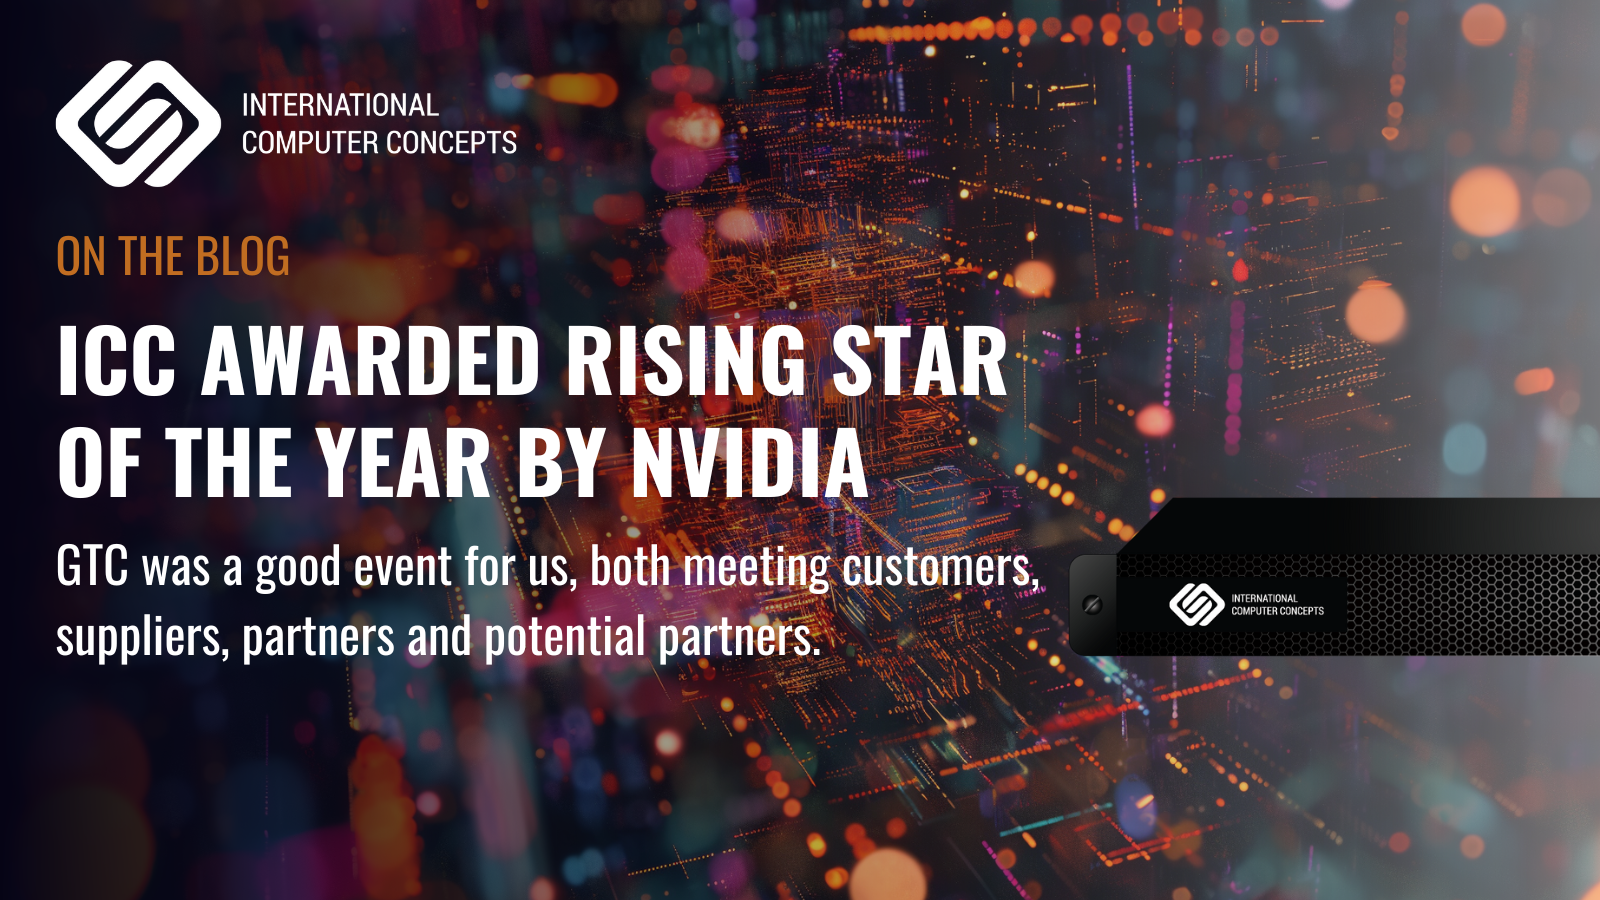 ICC awarded rising star of the year by NVIDIA